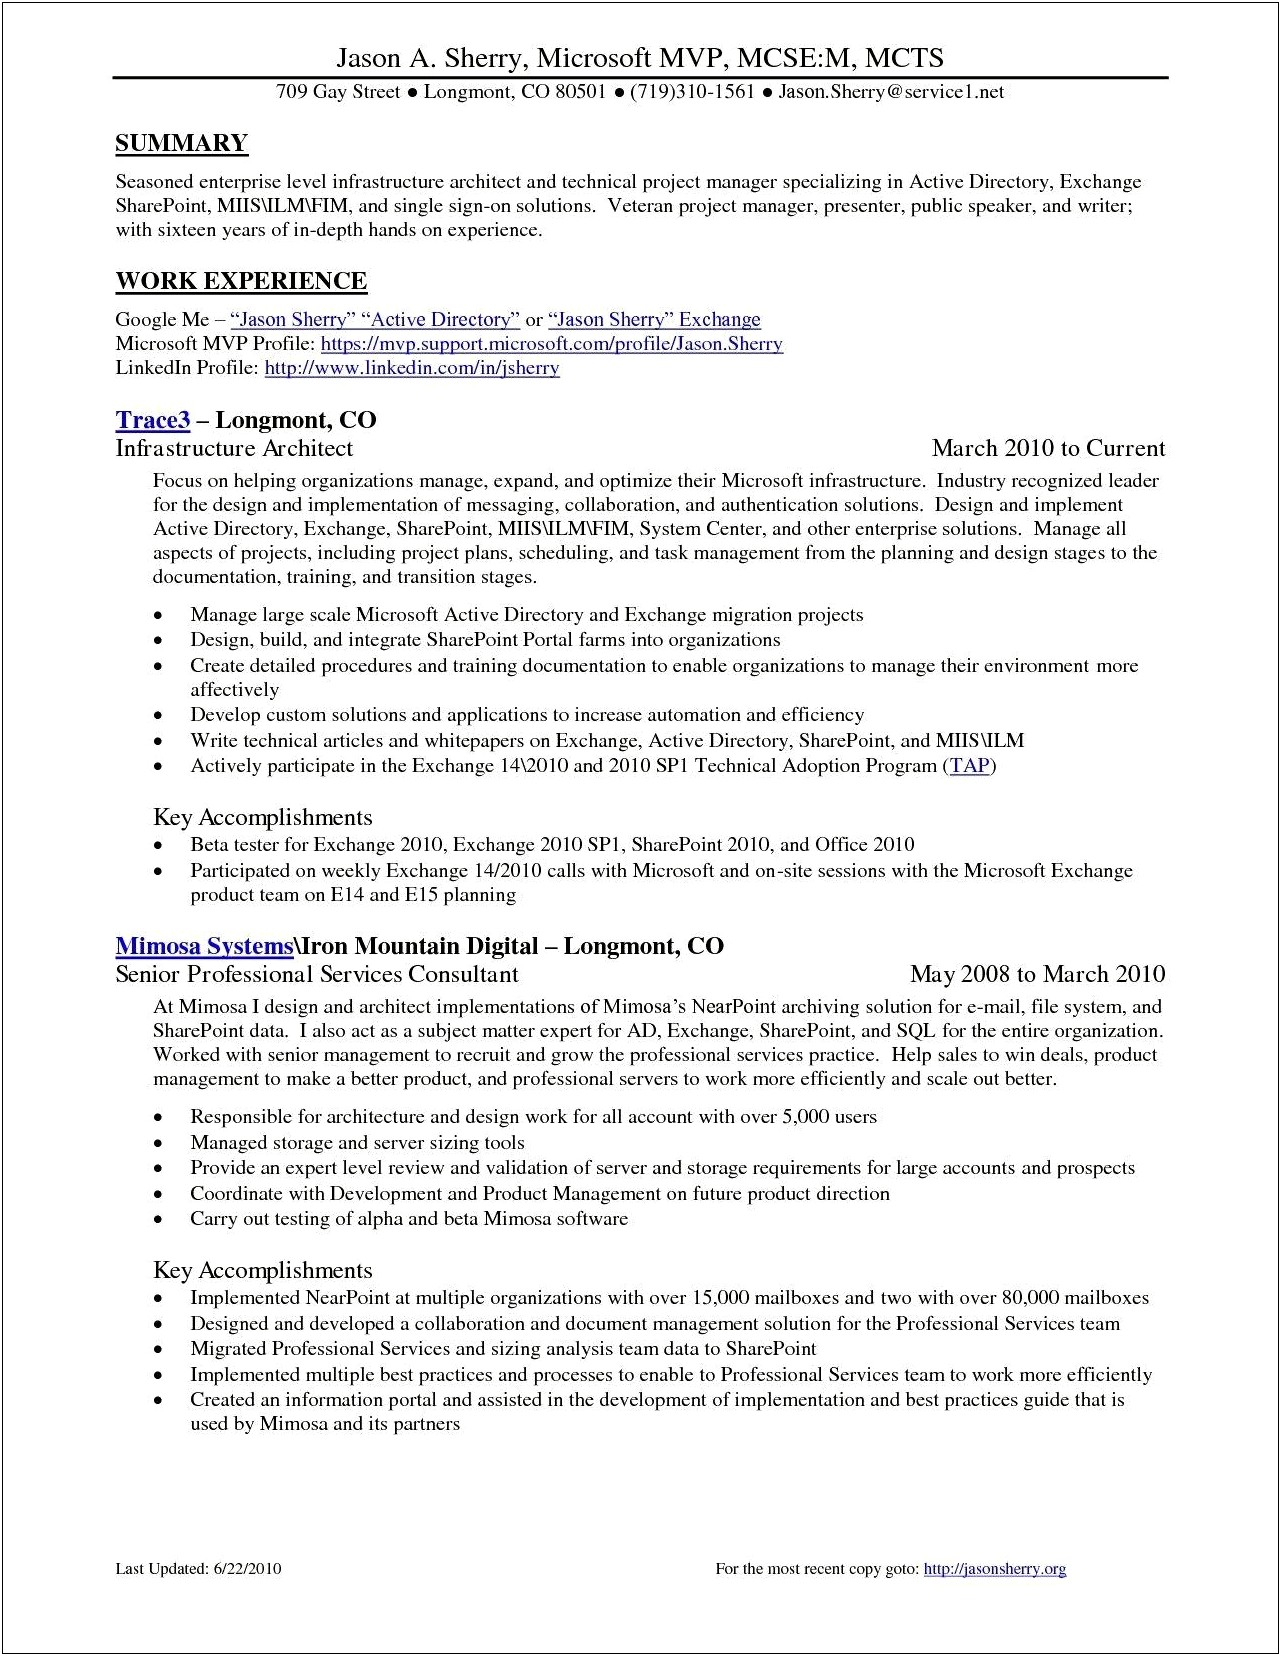 Technical Support Executive Resume Sample